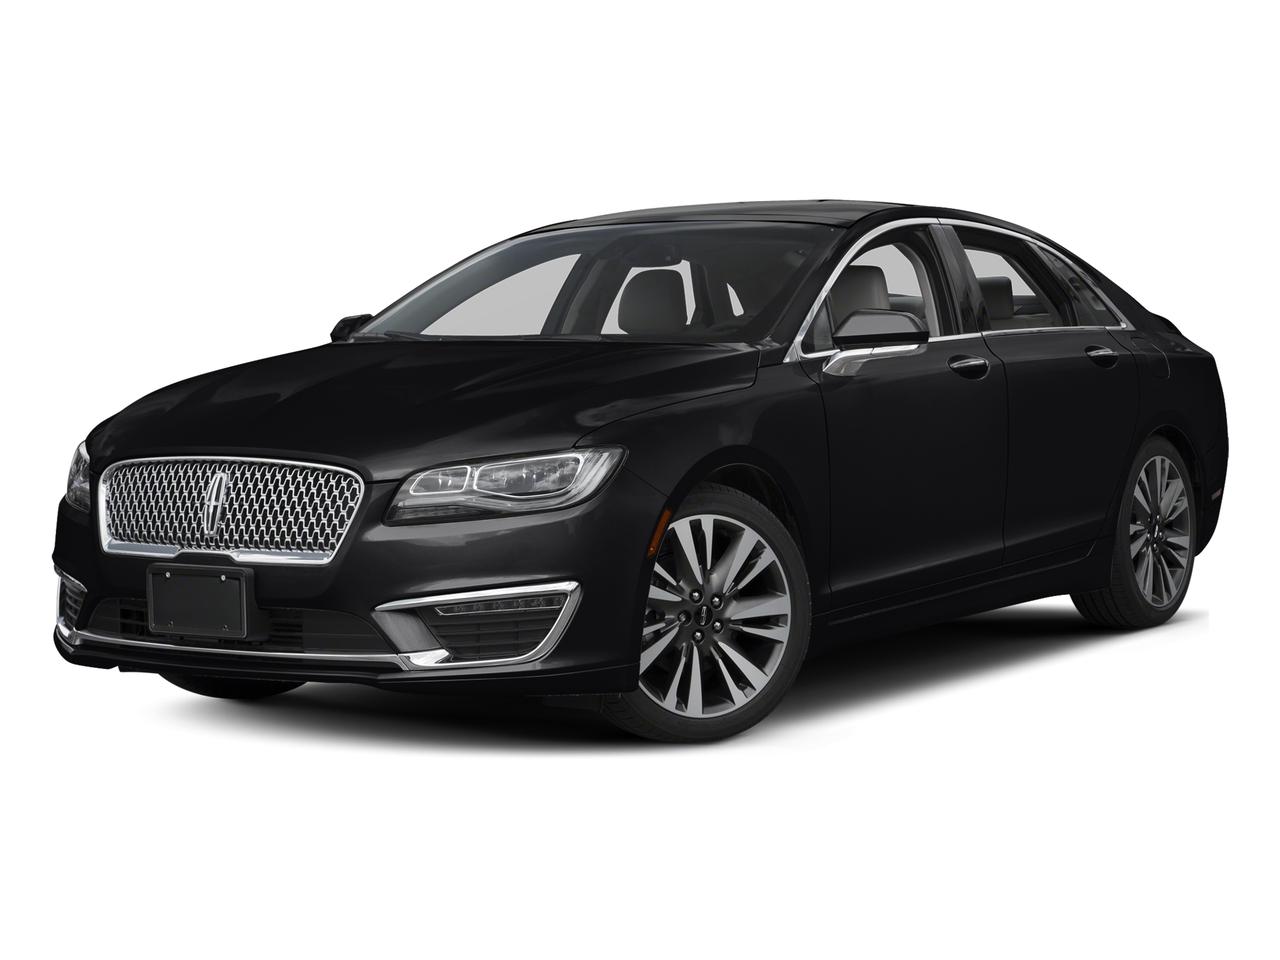 2017 LINCOLN MKZ Vehicle Photo in Souderton, PA 18964-1034